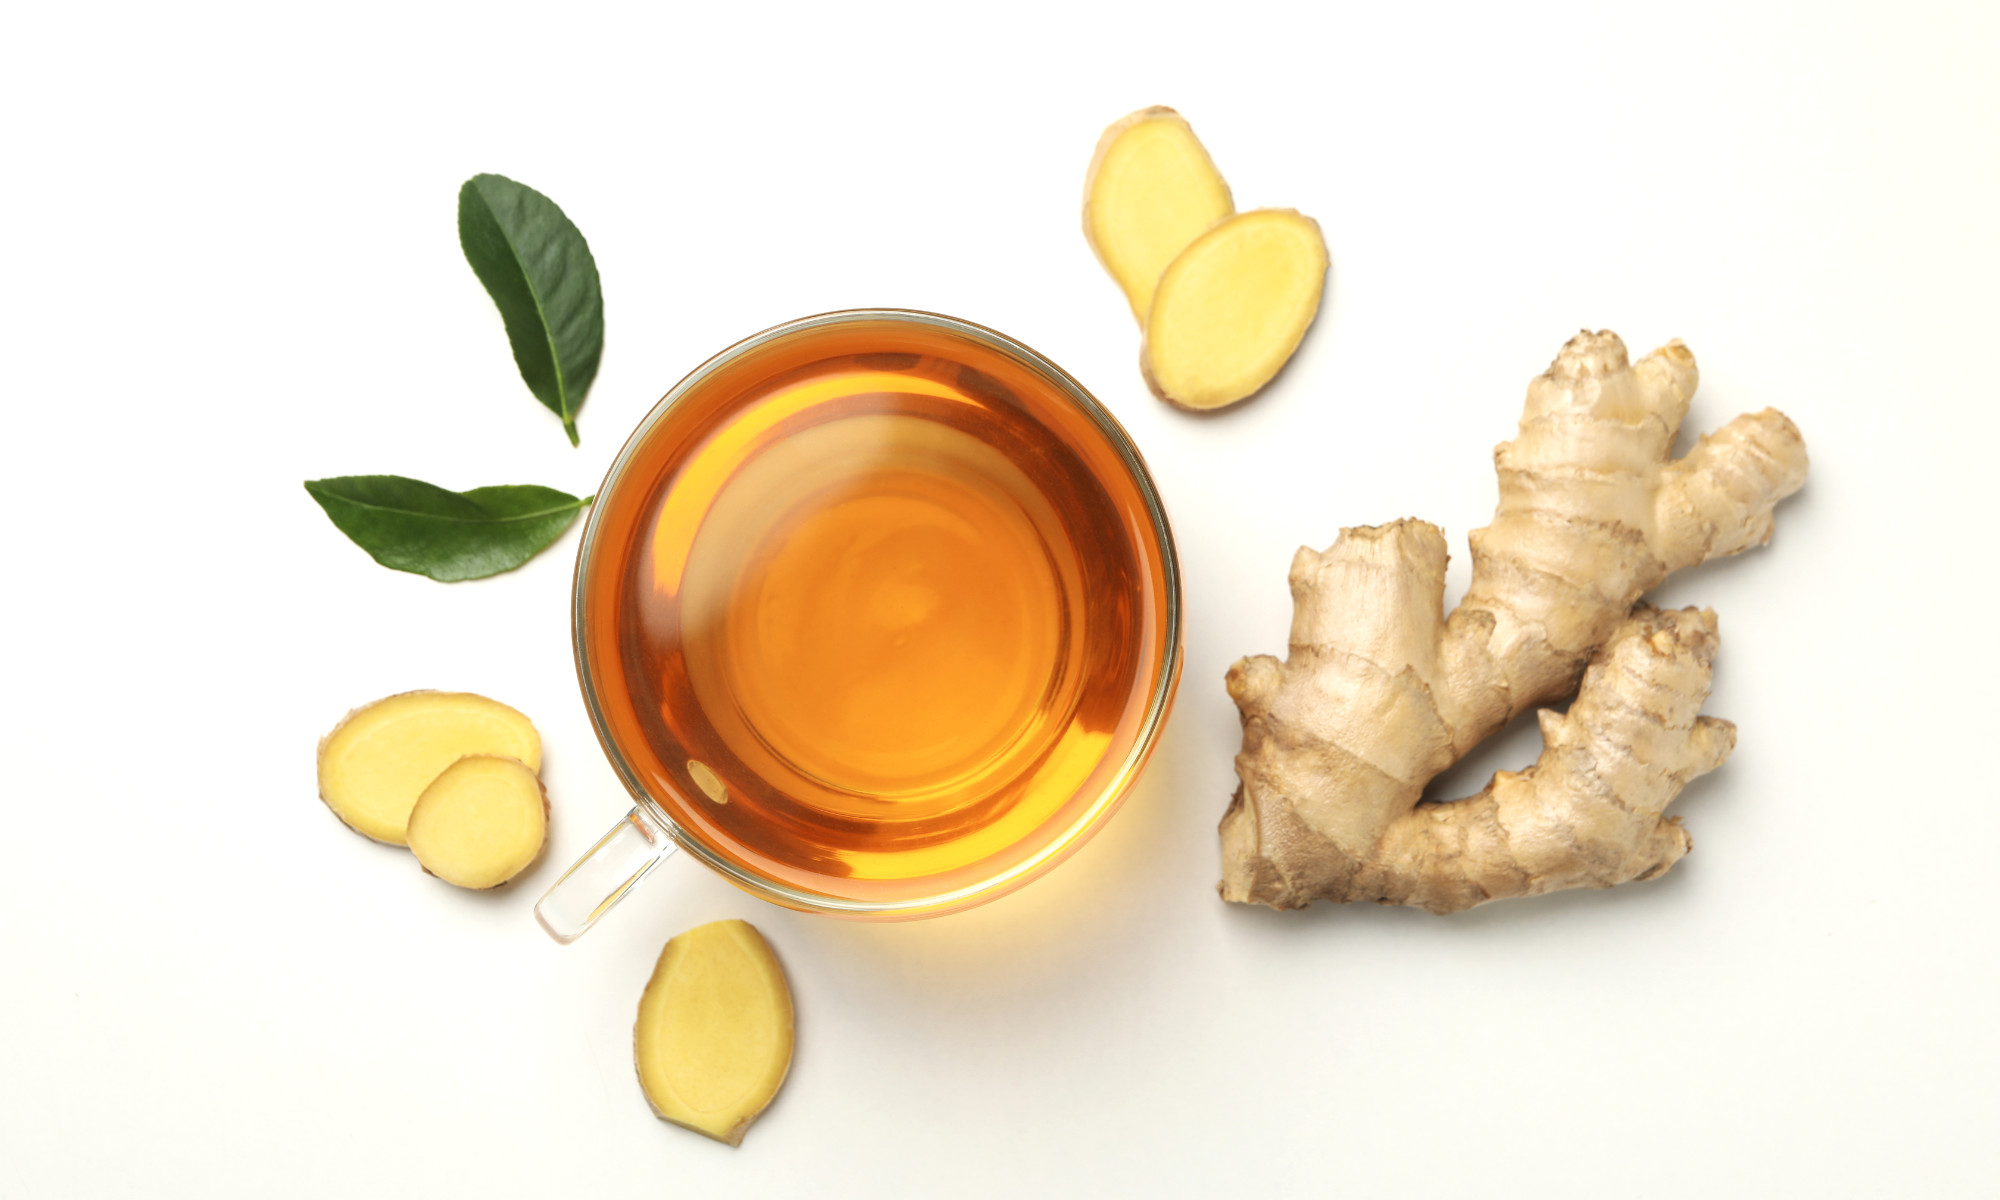 Ginger tea – for health and figure